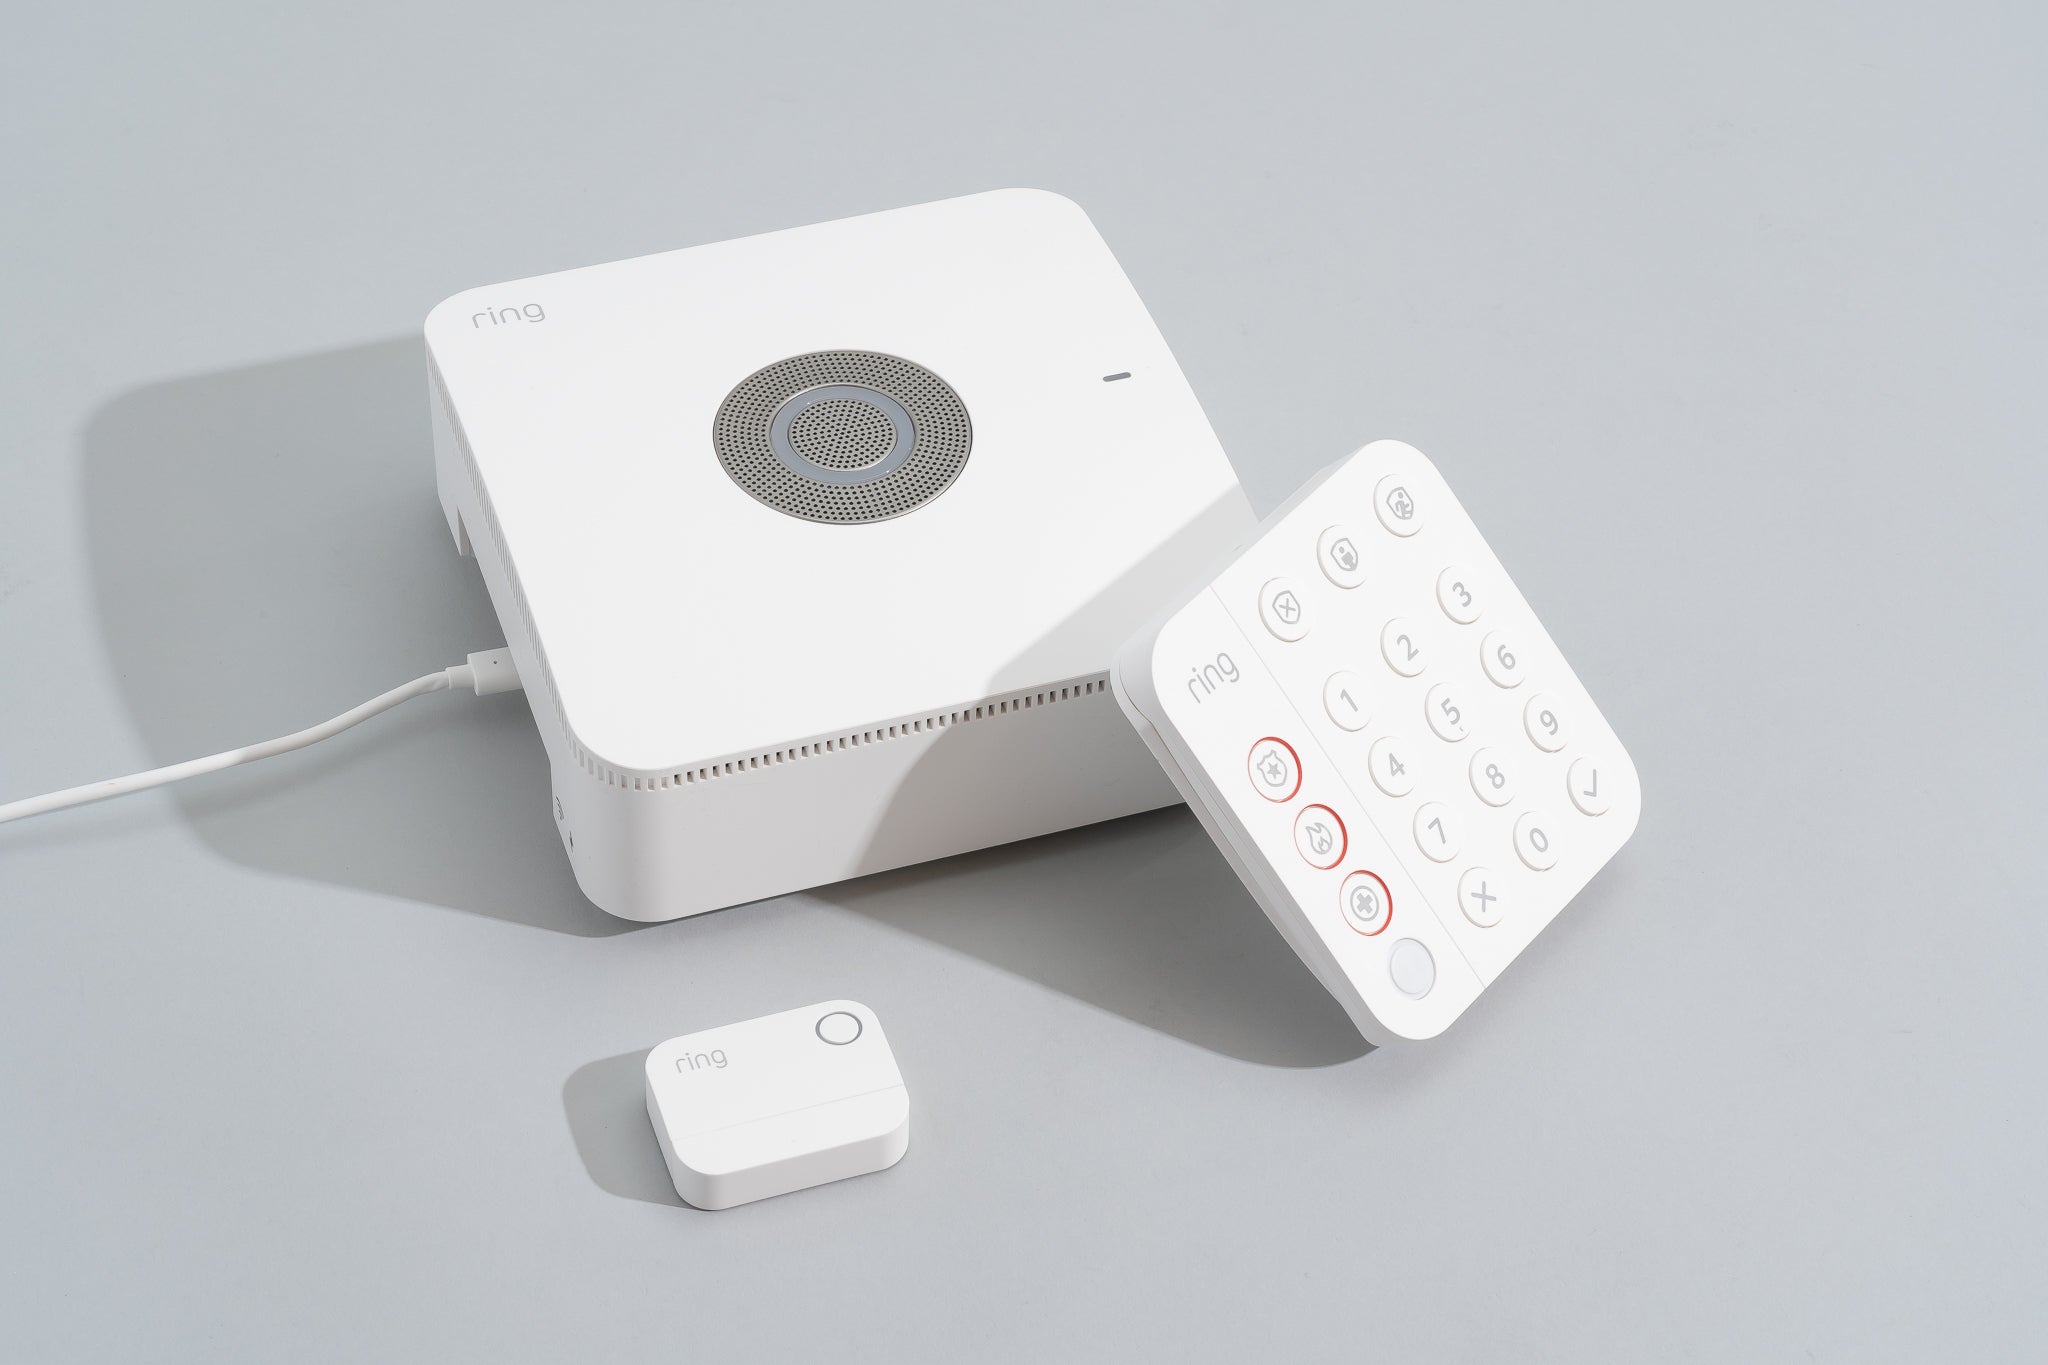 What Are The Best Home Alarm Systems?